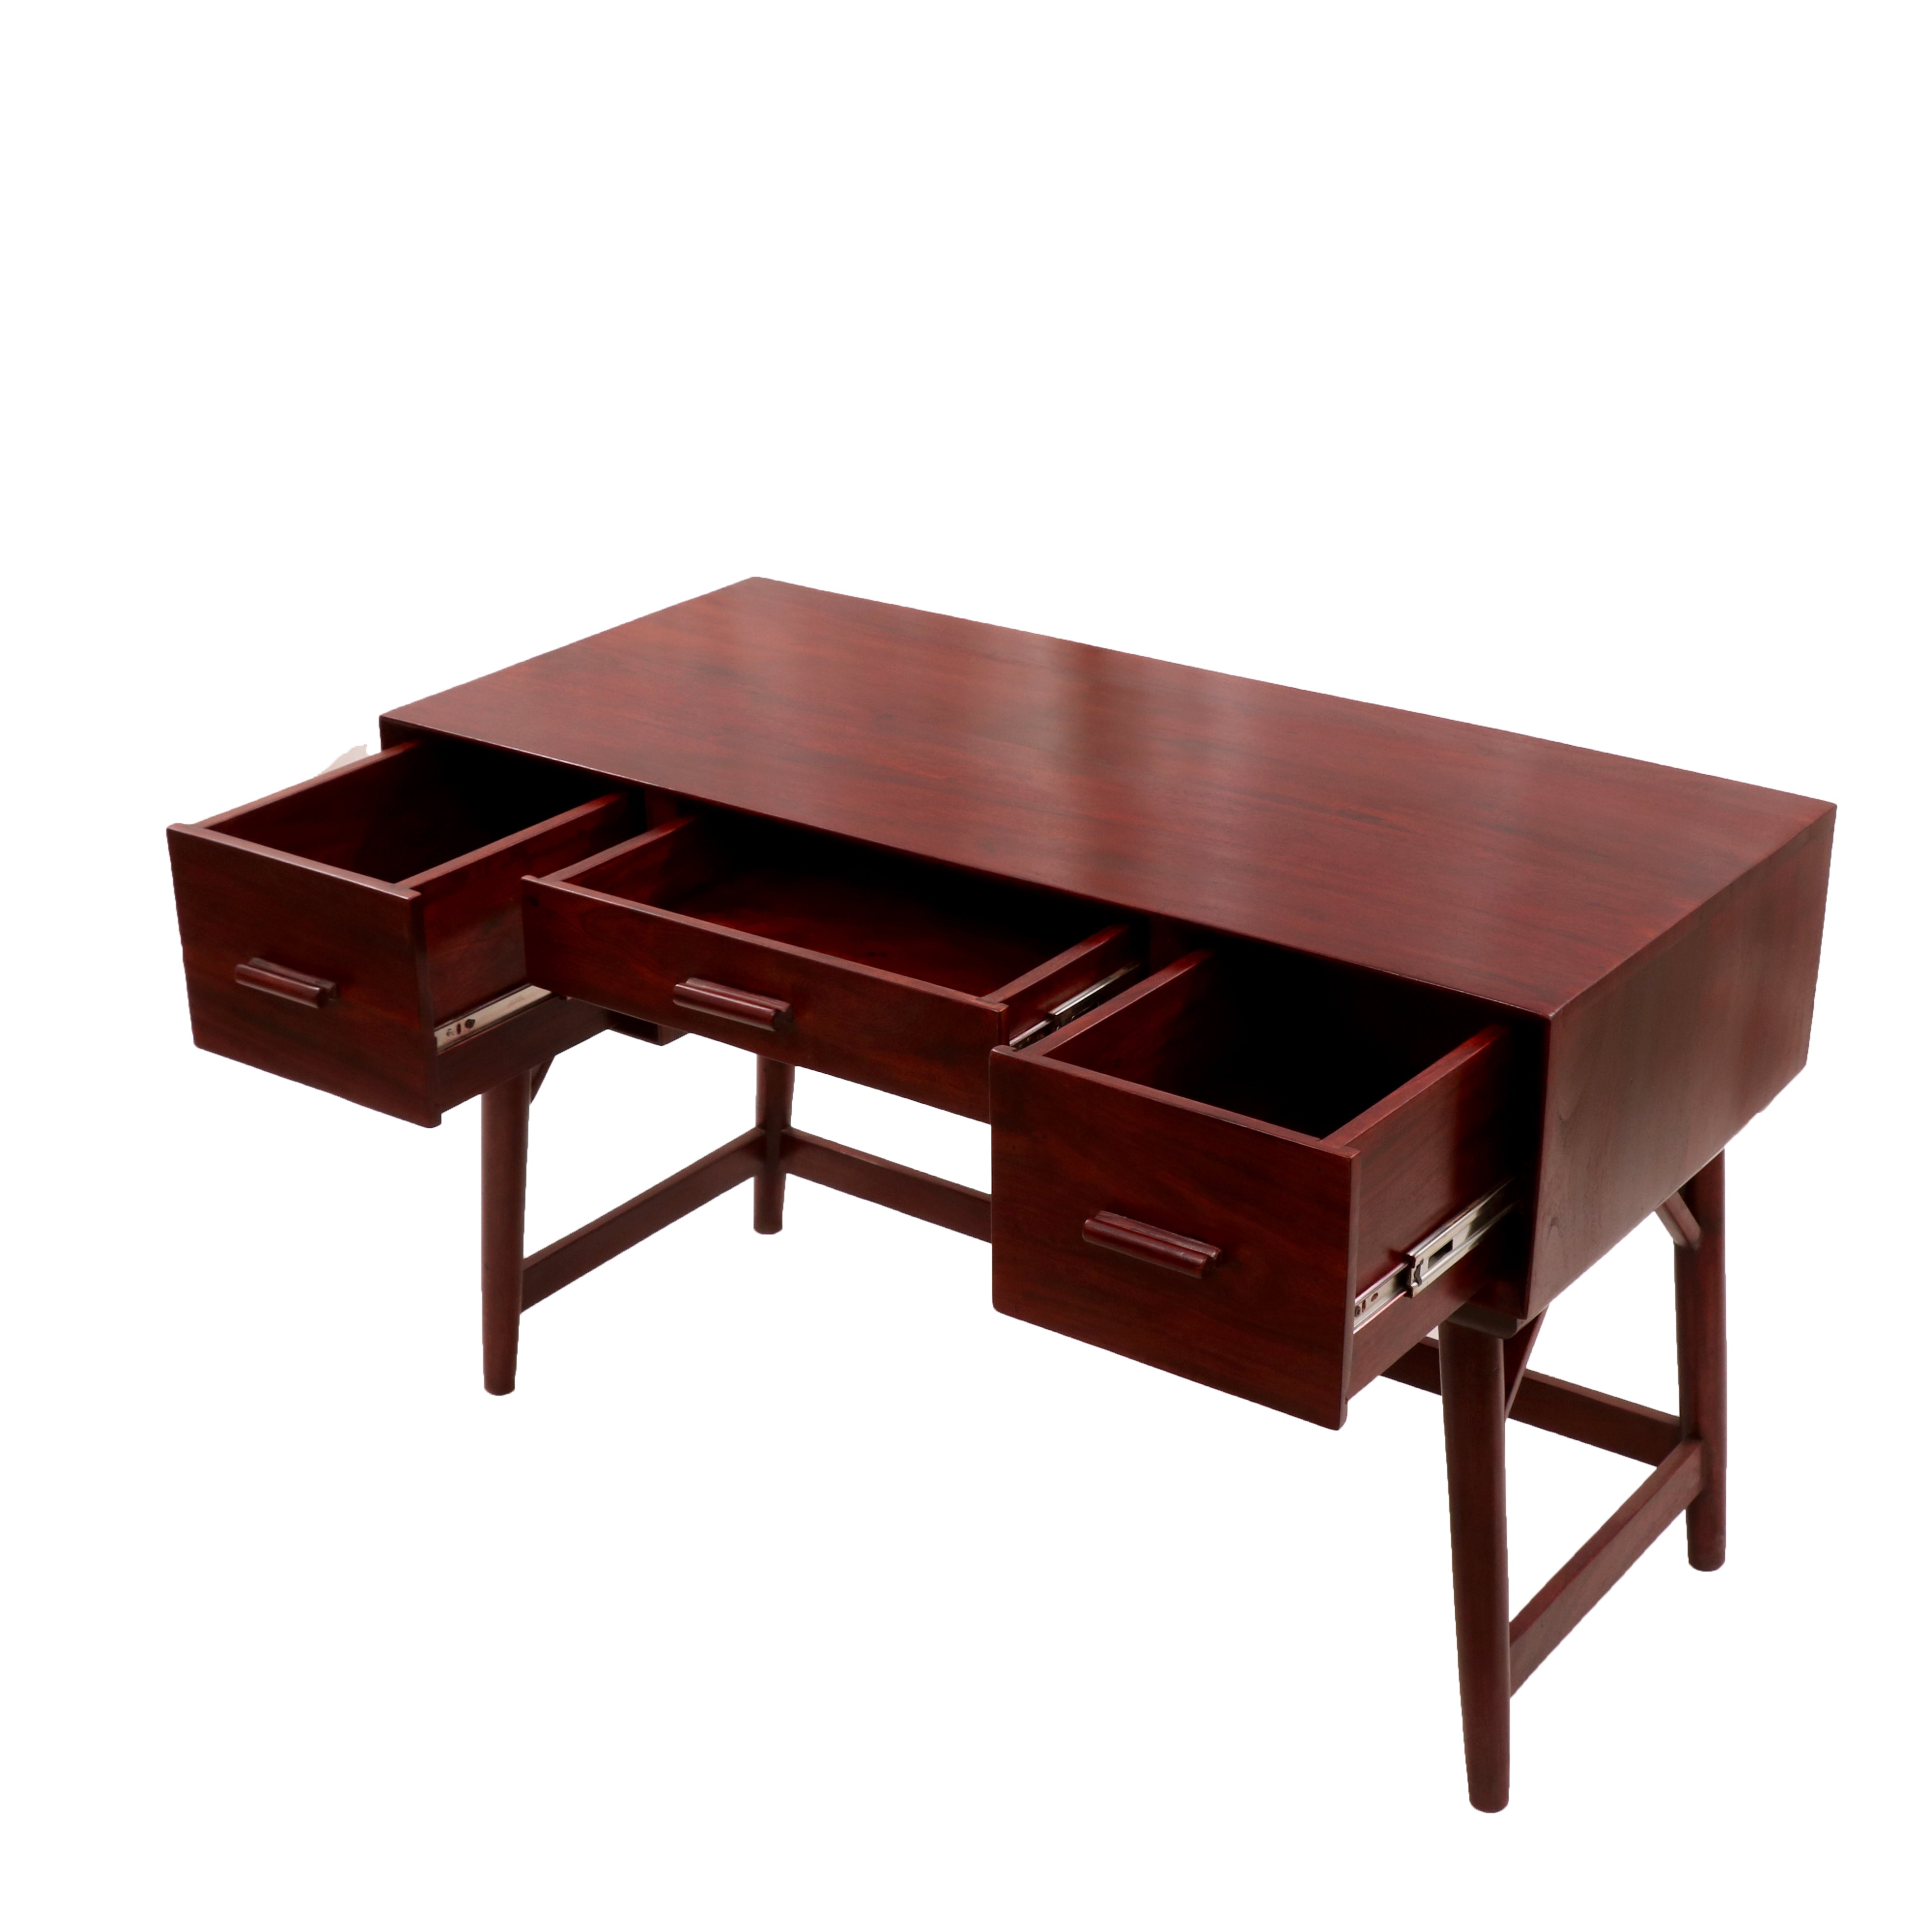 Rustic Heritage Wooden Desk Study Table